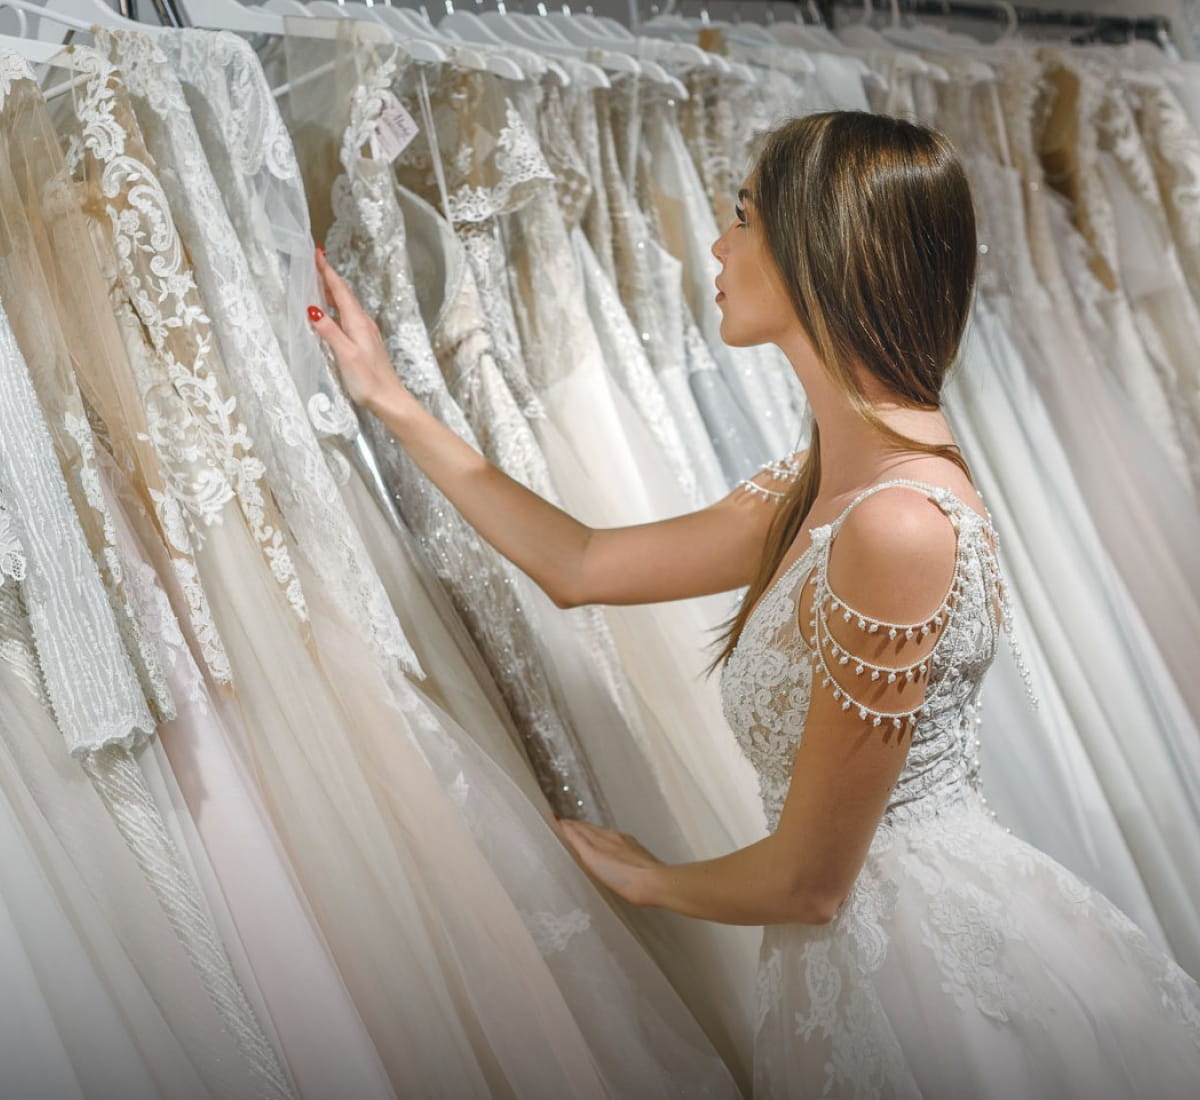 Everything you need to know about your wedding dress fitting